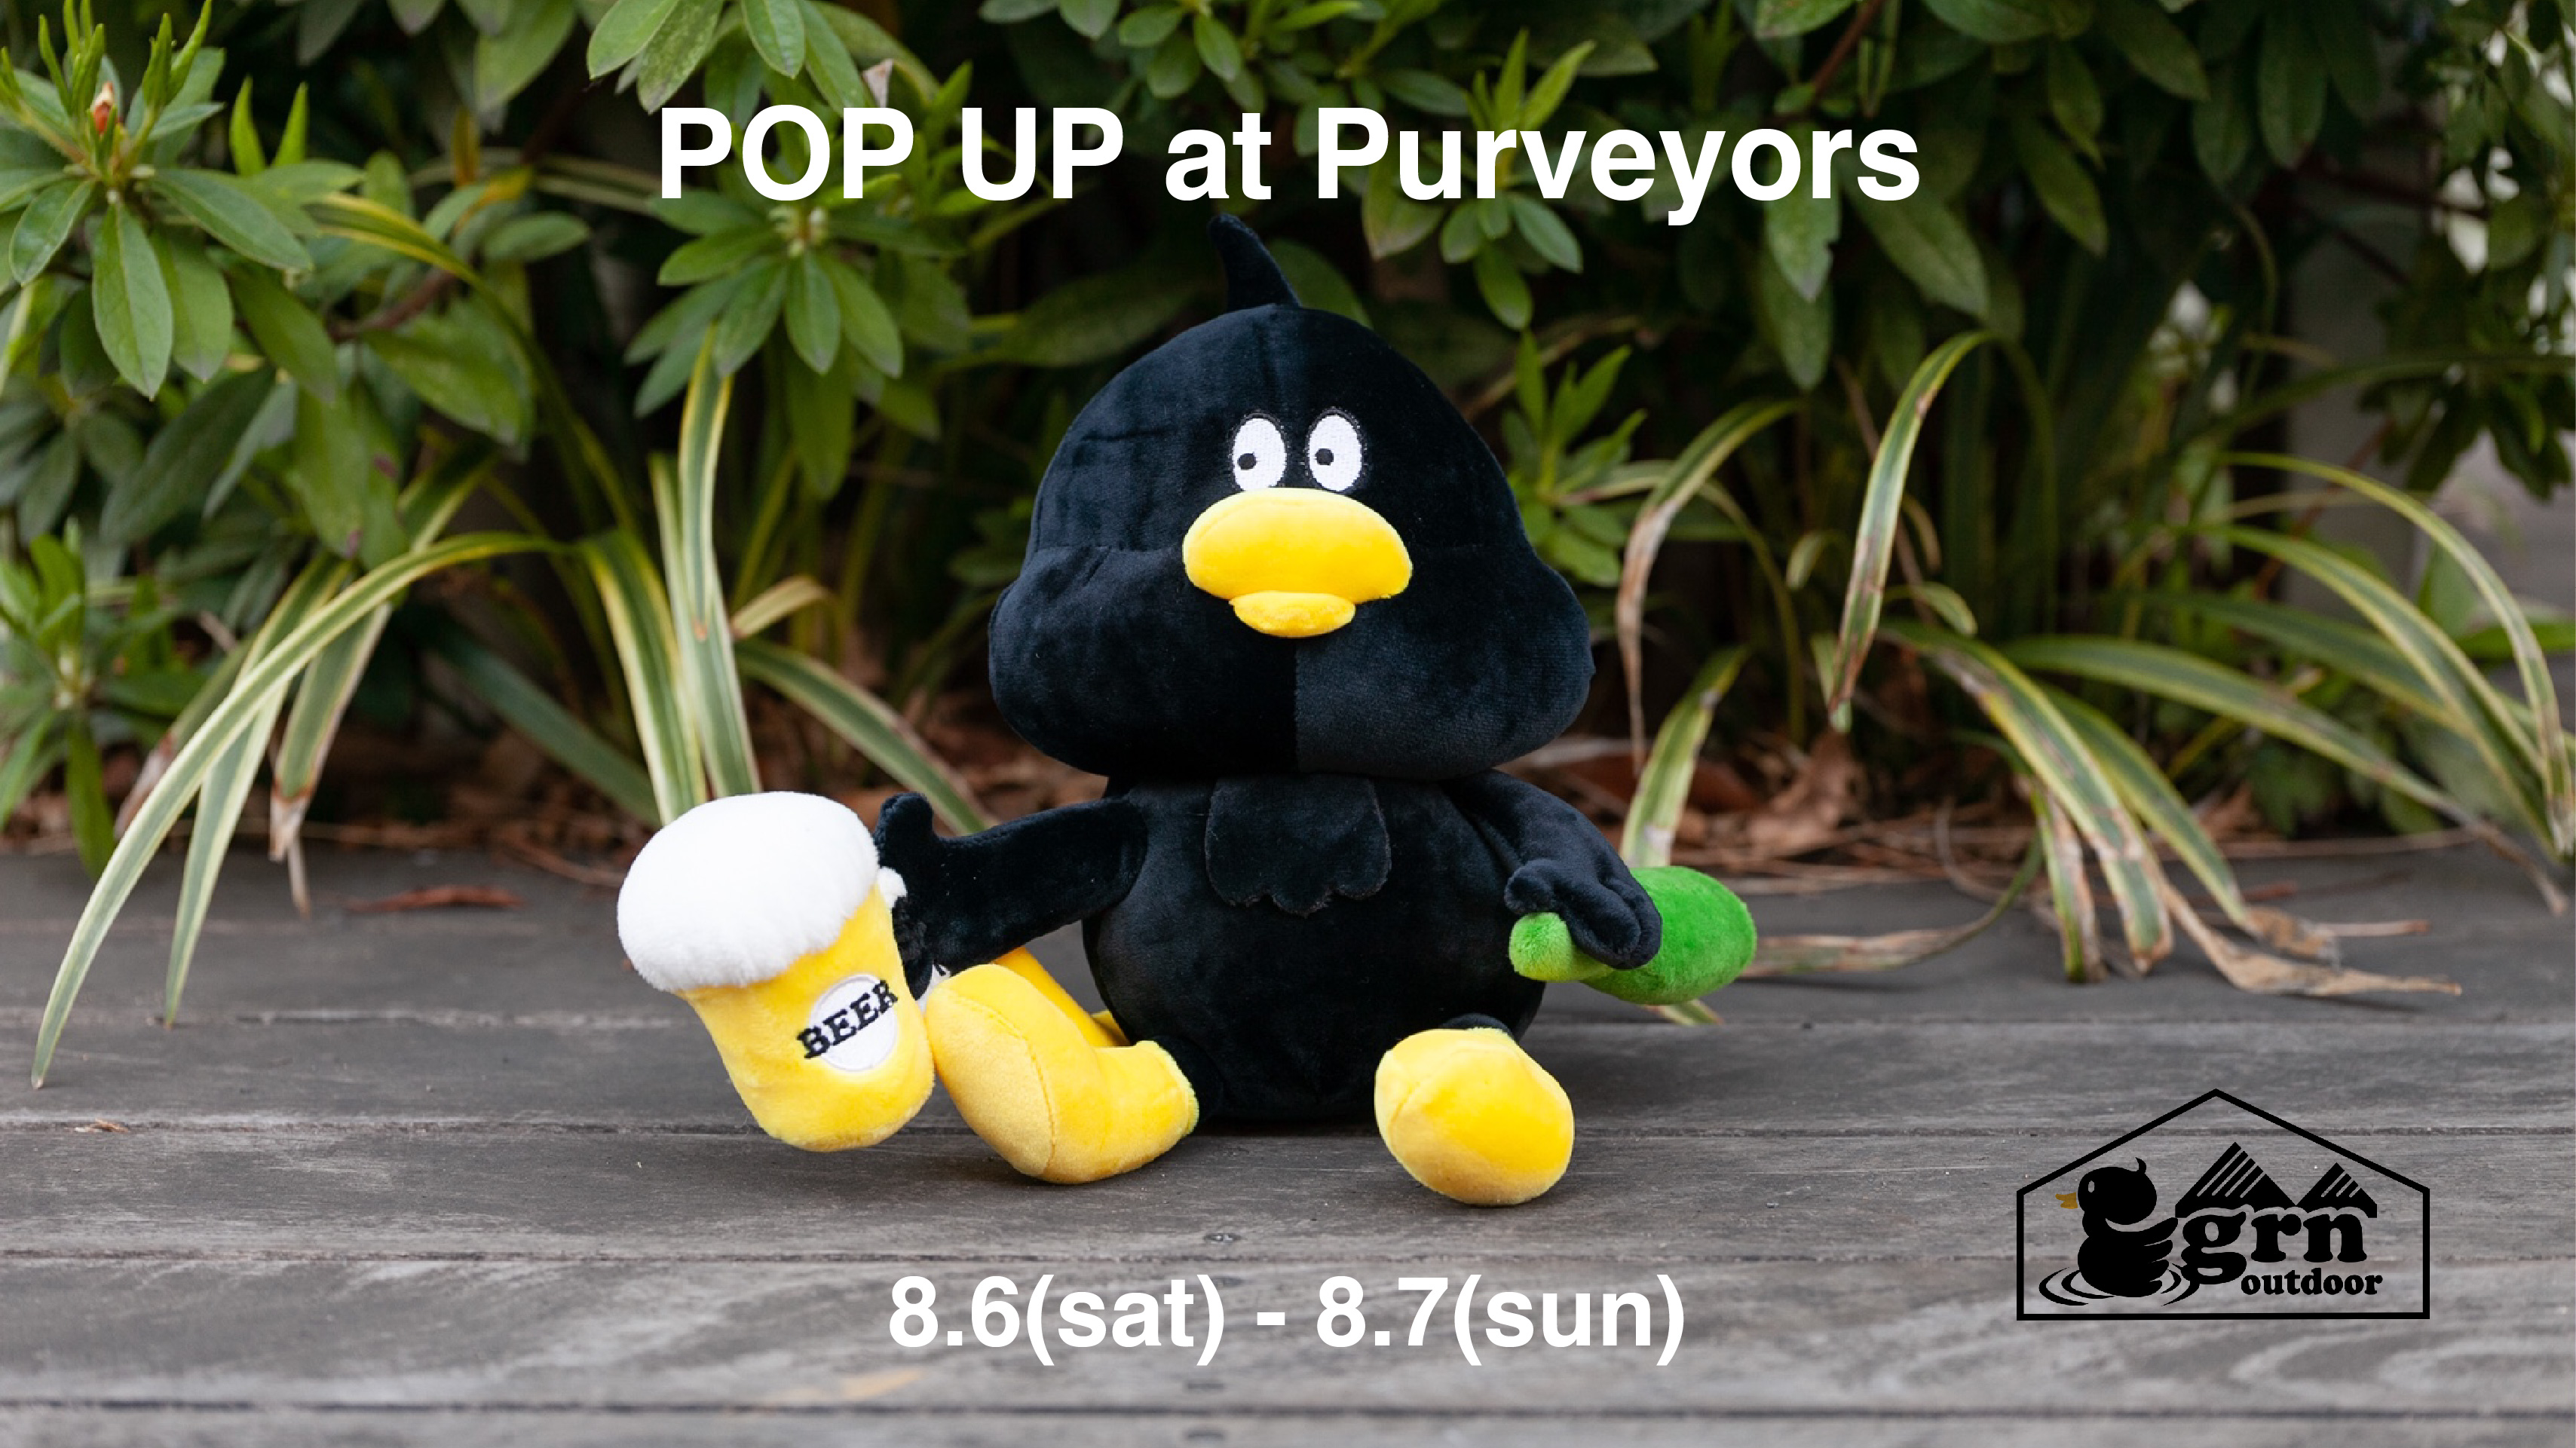 8/6-7 grn outdoor POP UP at Purveyors